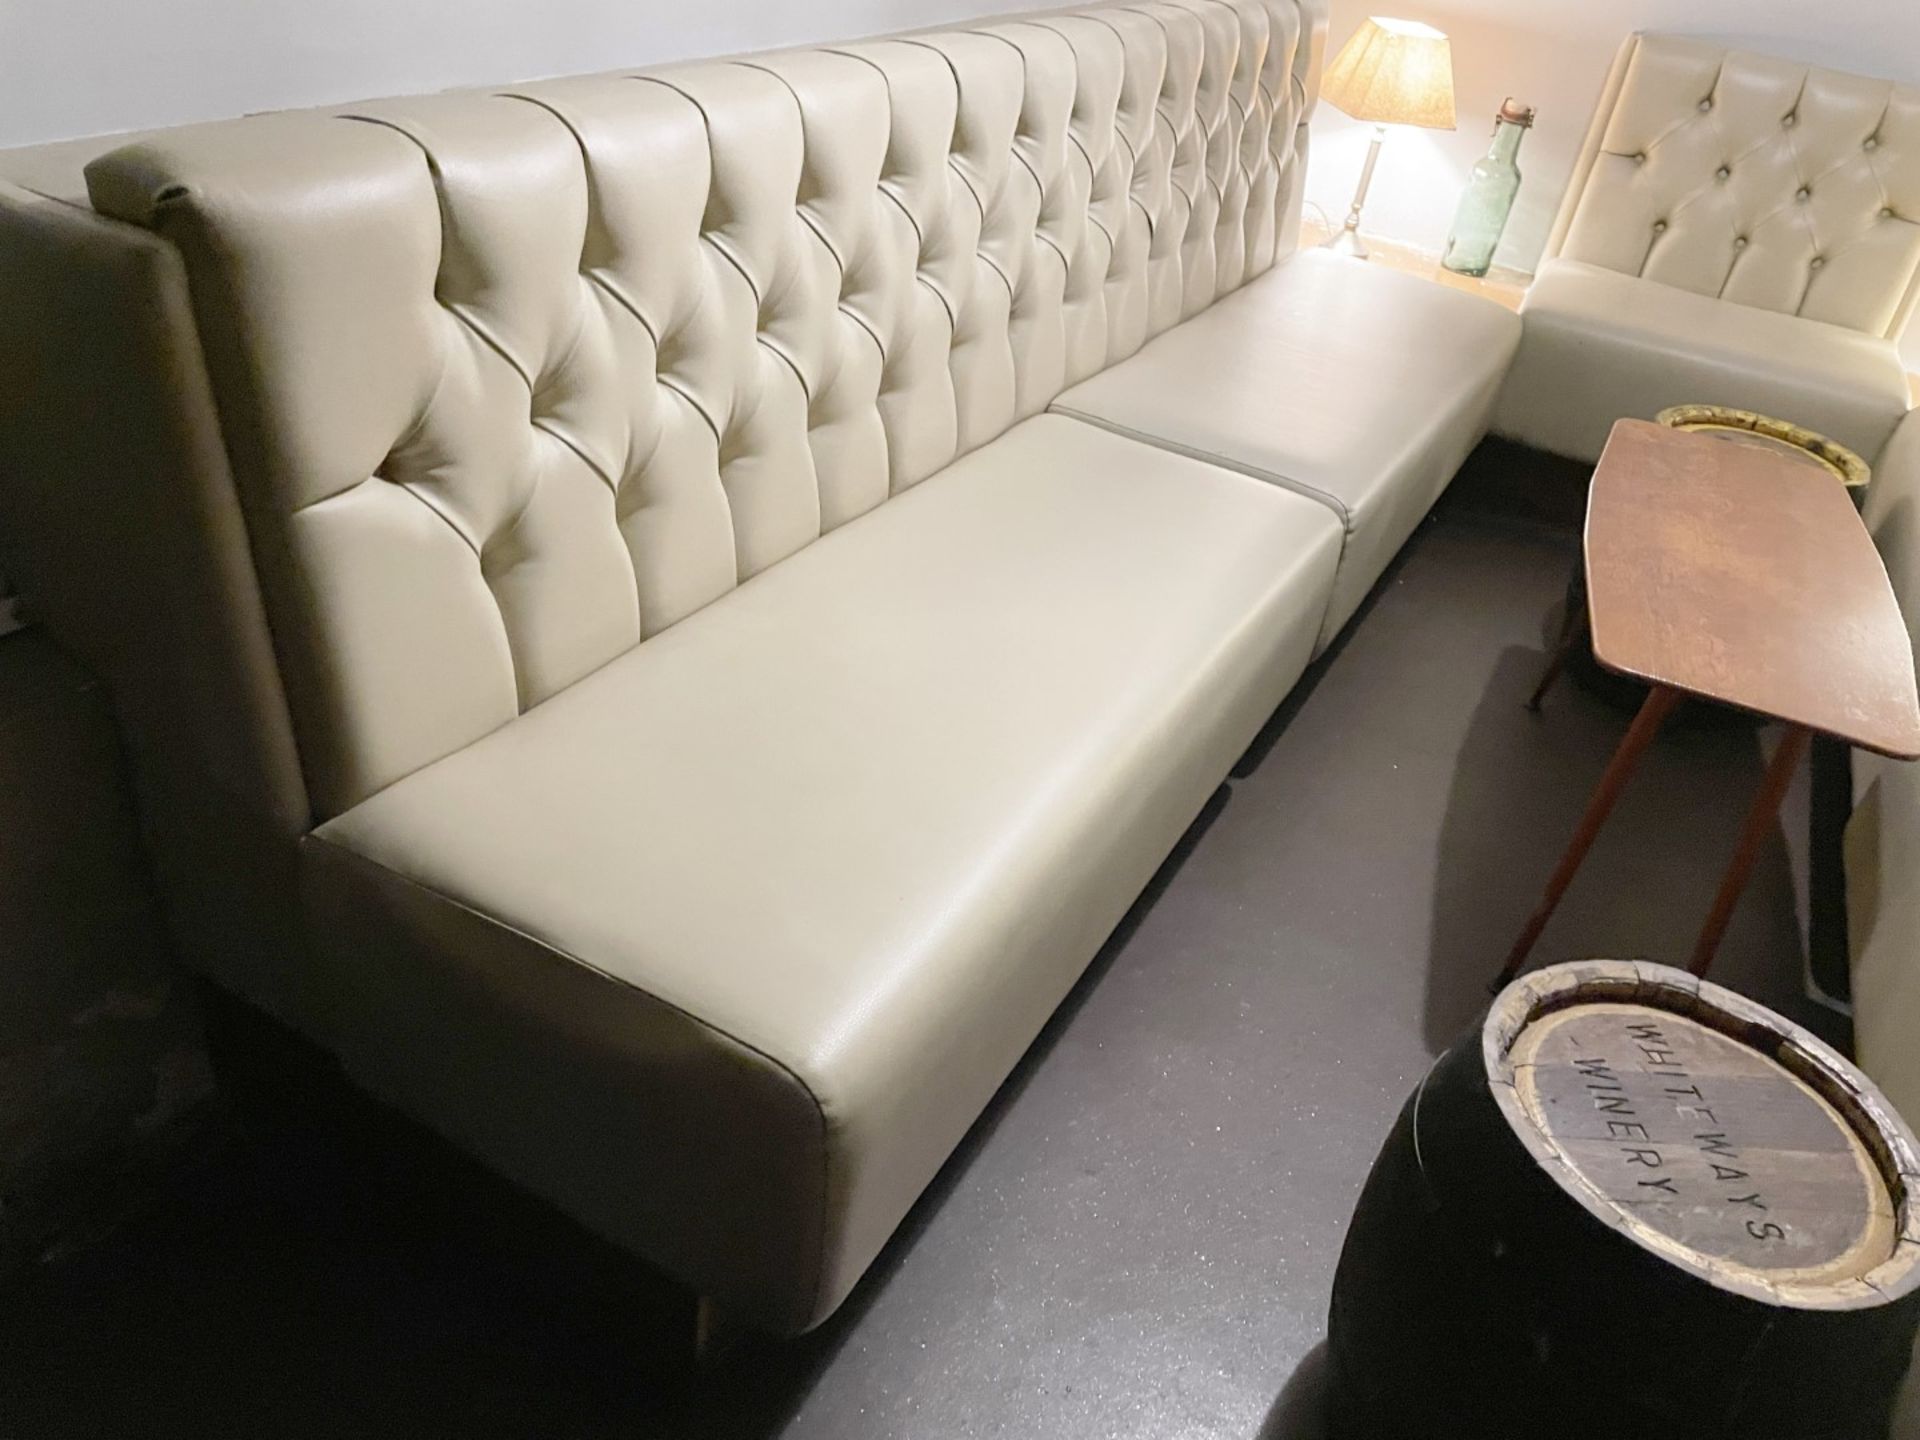 5 x Sections of Button Back Banquette Booth Seating Upholstered in a Cream Faux Leather - Image 3 of 6